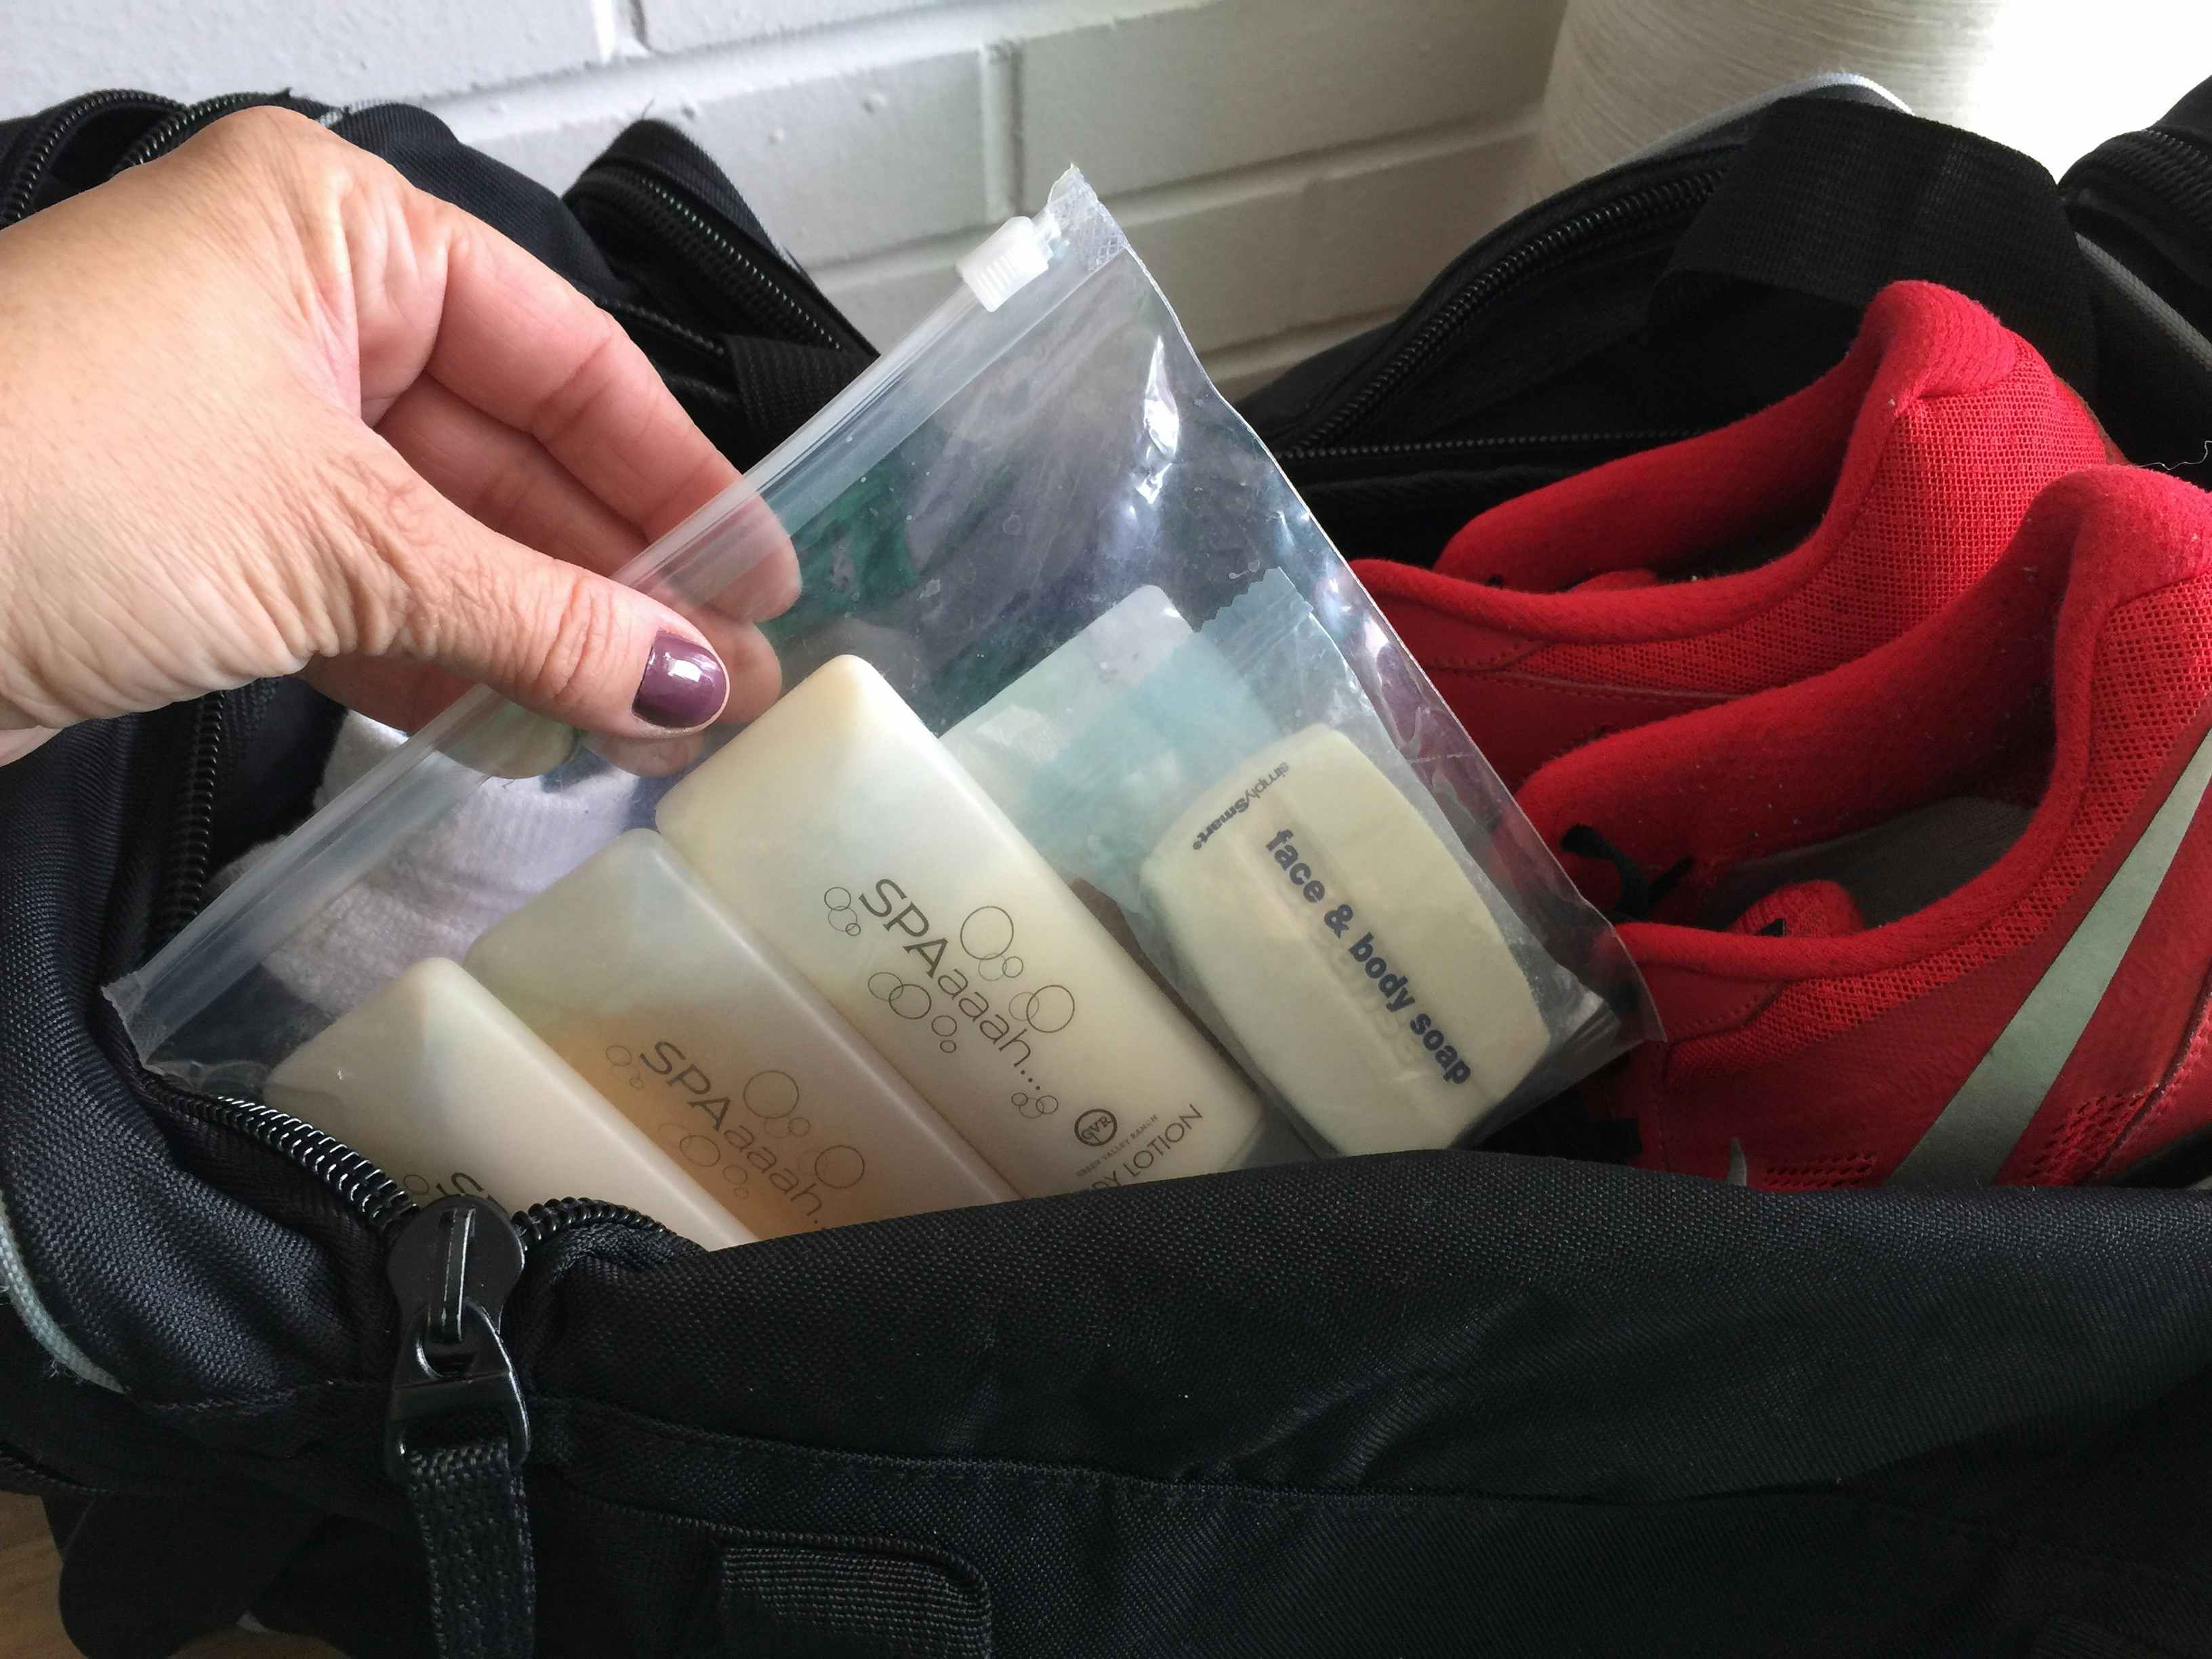 A person holding a bag with toiletries in it.